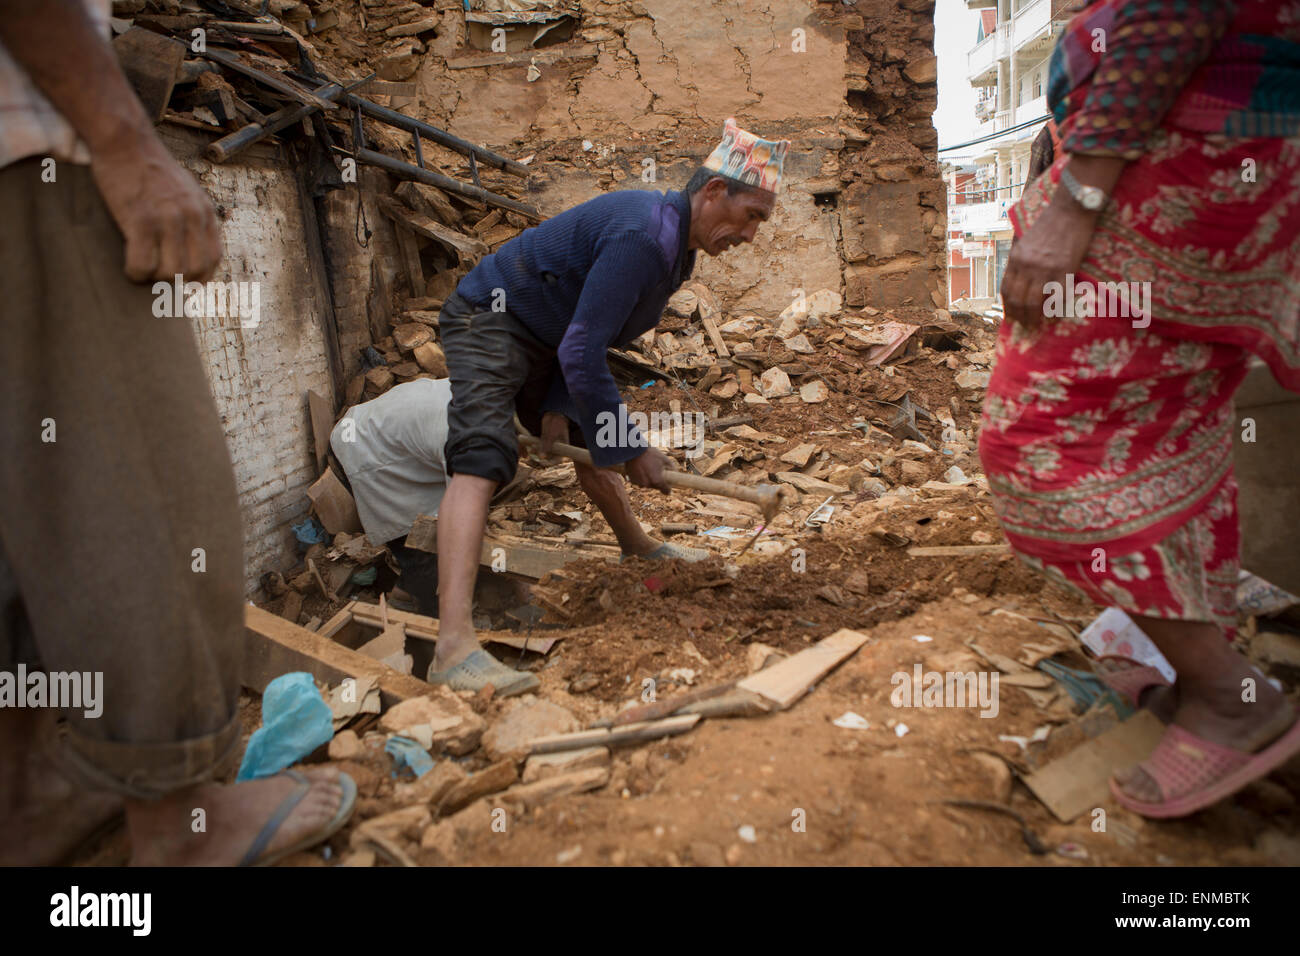 Residents of Chautara town dig through the rubble of their homes in Sindhulpalchowk District, Nepal following the 2015 earthquake. Stock Photo